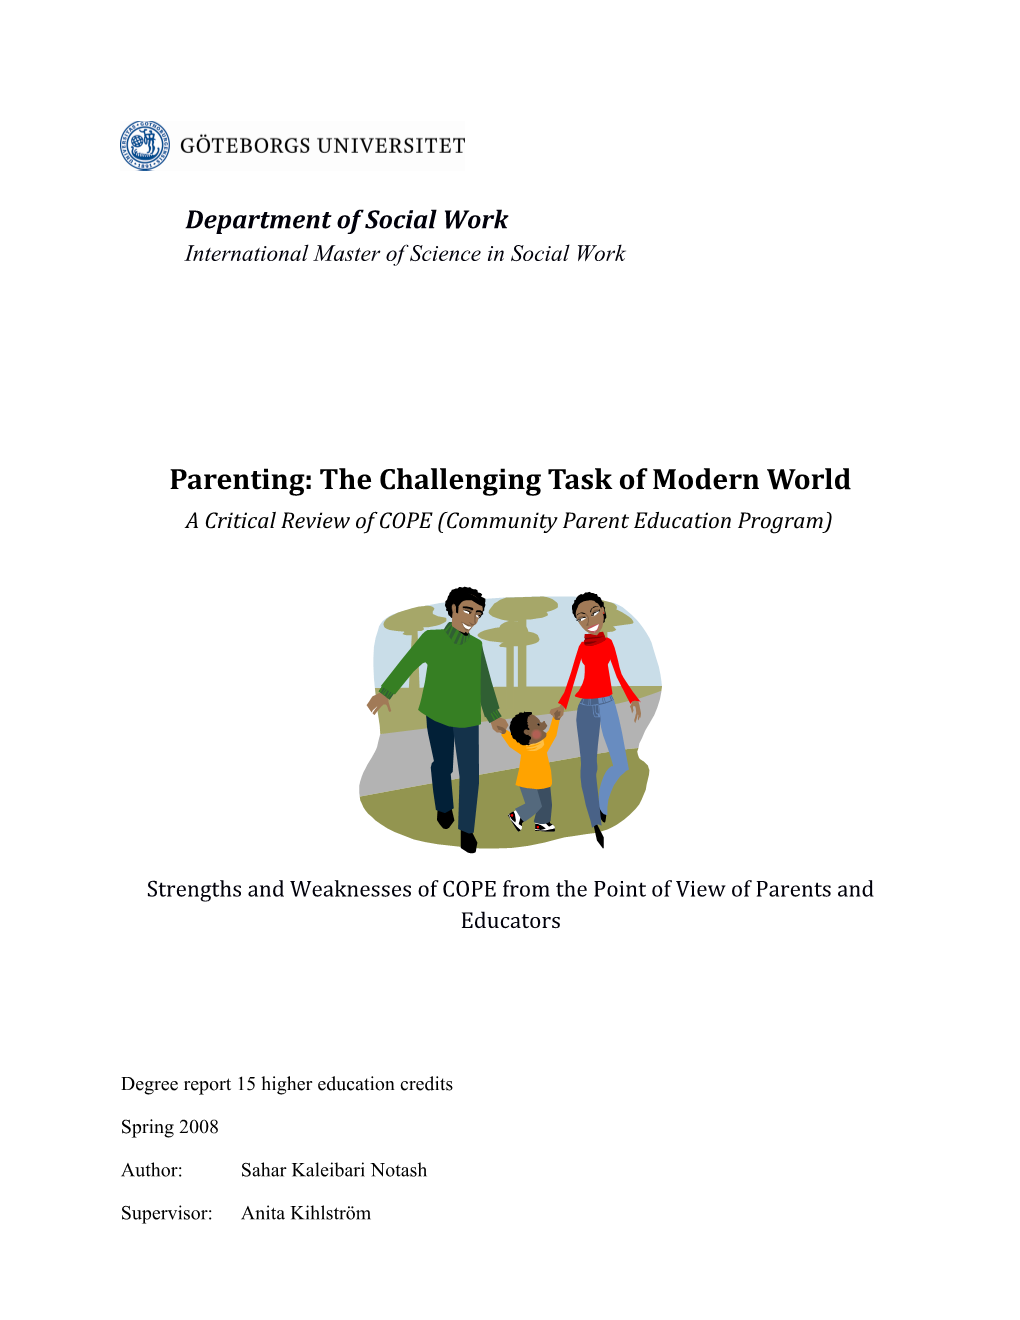 Parenting: the Challenging Task of Modern World